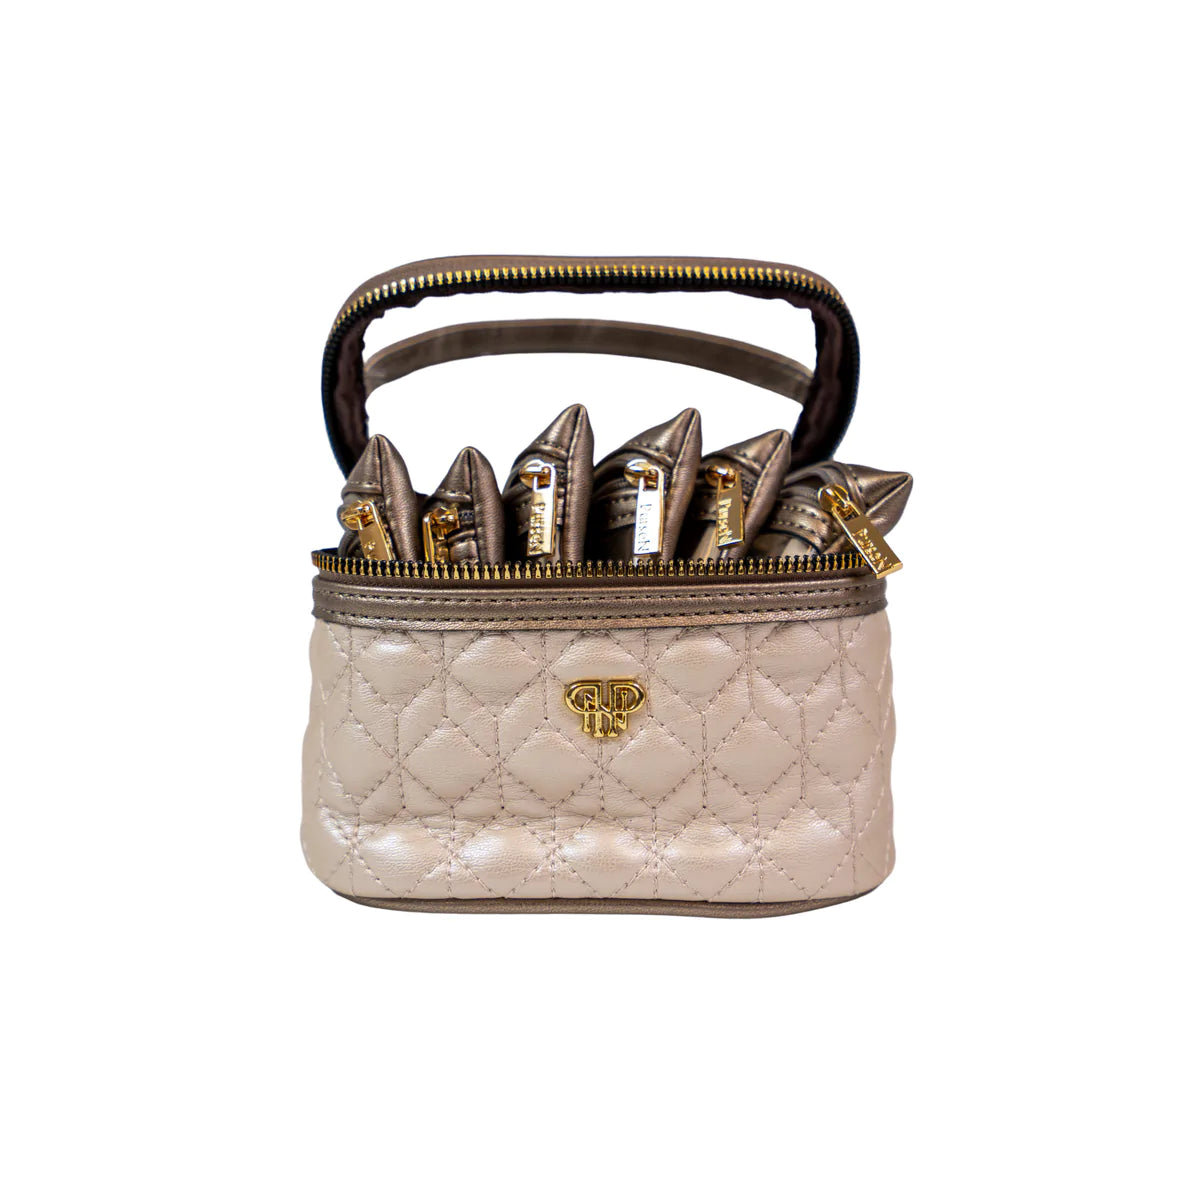 GETAWAY JEWELRY CASE - NATURAL LUSTER